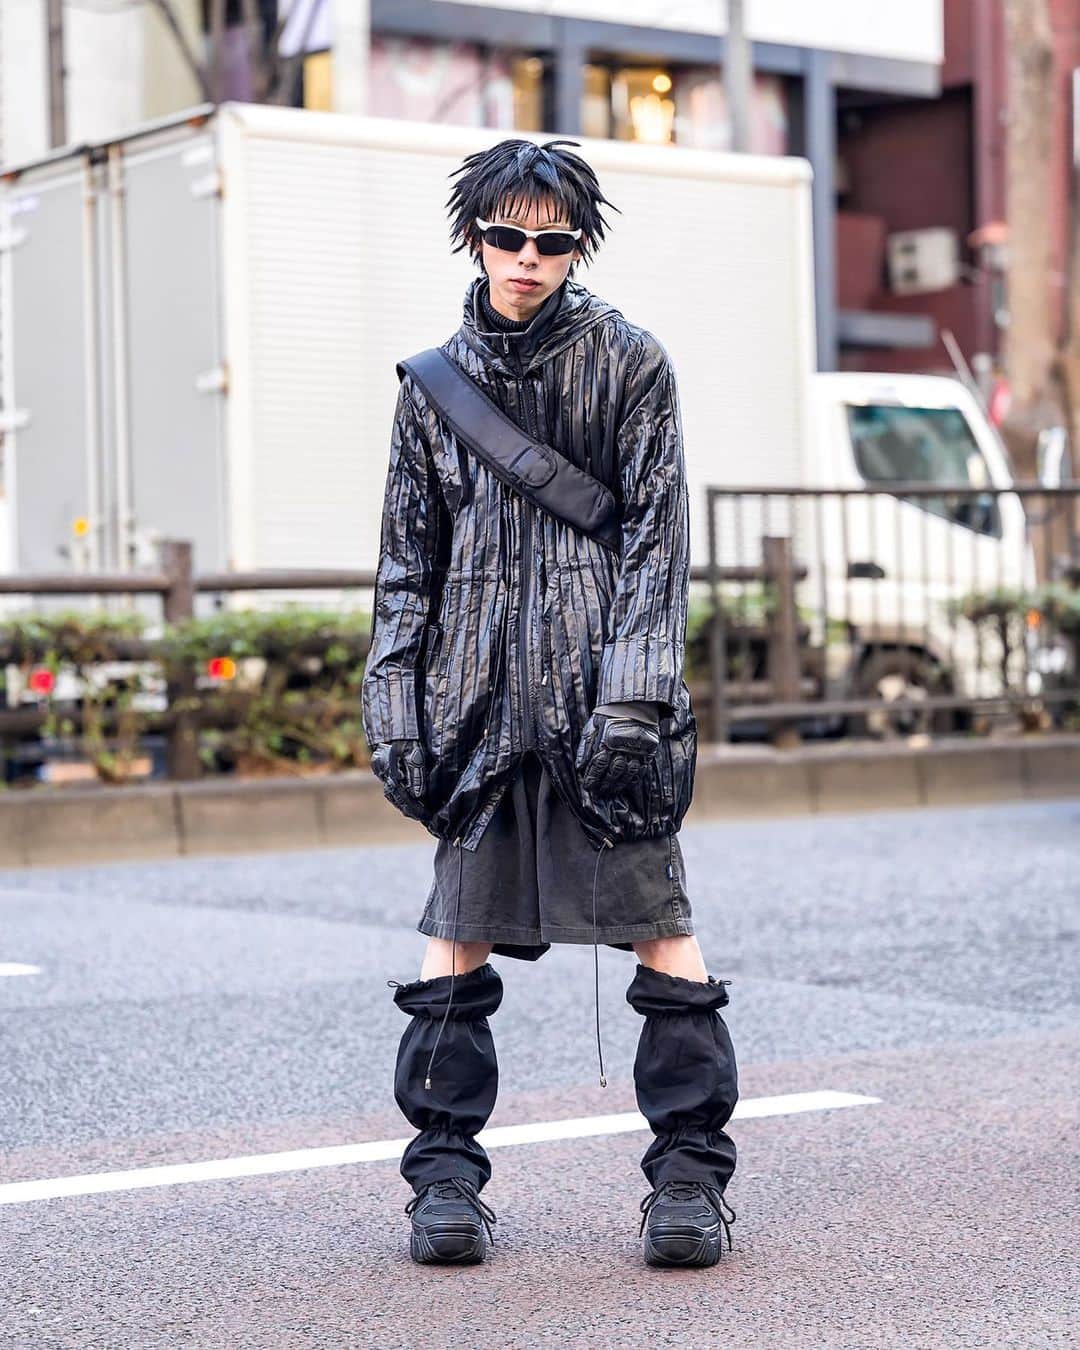 Harajuku Japanのインスタグラム：「When we spotted Jin on the street in Harajuku last weekend, we thought he may have just walked out of a 1999 issue of legendary Japanese street style magazine FRUiTS! In addition to his Japanese cyber hairstyle, he's wearing a pleated hooded drawstring jacket, sunglasses, tech gloves, wide denim shorts, leg covers, a crossbody bag, and sneakers. While Jin didn't share much brand info, he did tell us he's active on Instagram (@ymuej). Swipe left to see closeups and let us know what you think (of his look and of cyber fashion) in the comments!  #JapaneseFashion #Y2KAesthetic #JapaneseStreetwear #Harajuku #CyberFashion #JapaneseHairstyle #FRUiTSMagazine #JapaneseStreetFashion #JapaneseStreetStyle #TokyoFashion #Harajuku #LegCovers #原宿 #streetstyle #Tokyo #StreetFashion #Japan #Fashion #Style #ootd #Y2KFashion #サイバーファッション」